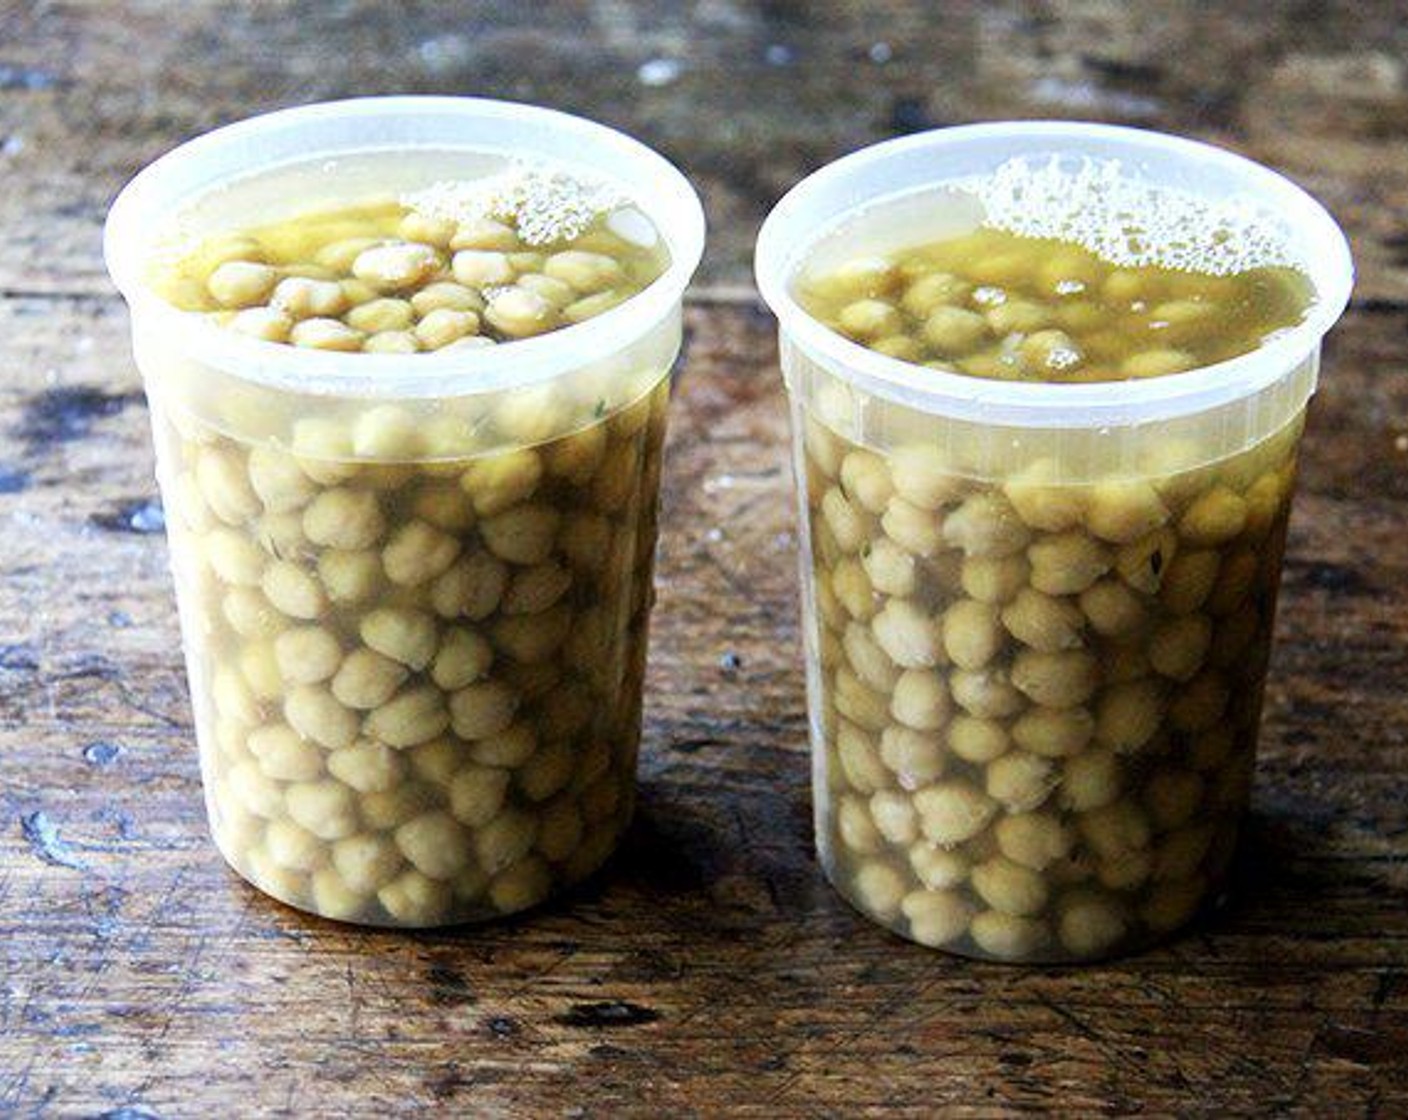 step 4 Let beans cool in their cooking liquid. Discard thyme sprigs, bay leaf, and onion. Store beans in their cooking liquid for 5-7 days in the fridge and many months in the freezer. Use as desired in any recipes calling for chickpeas.